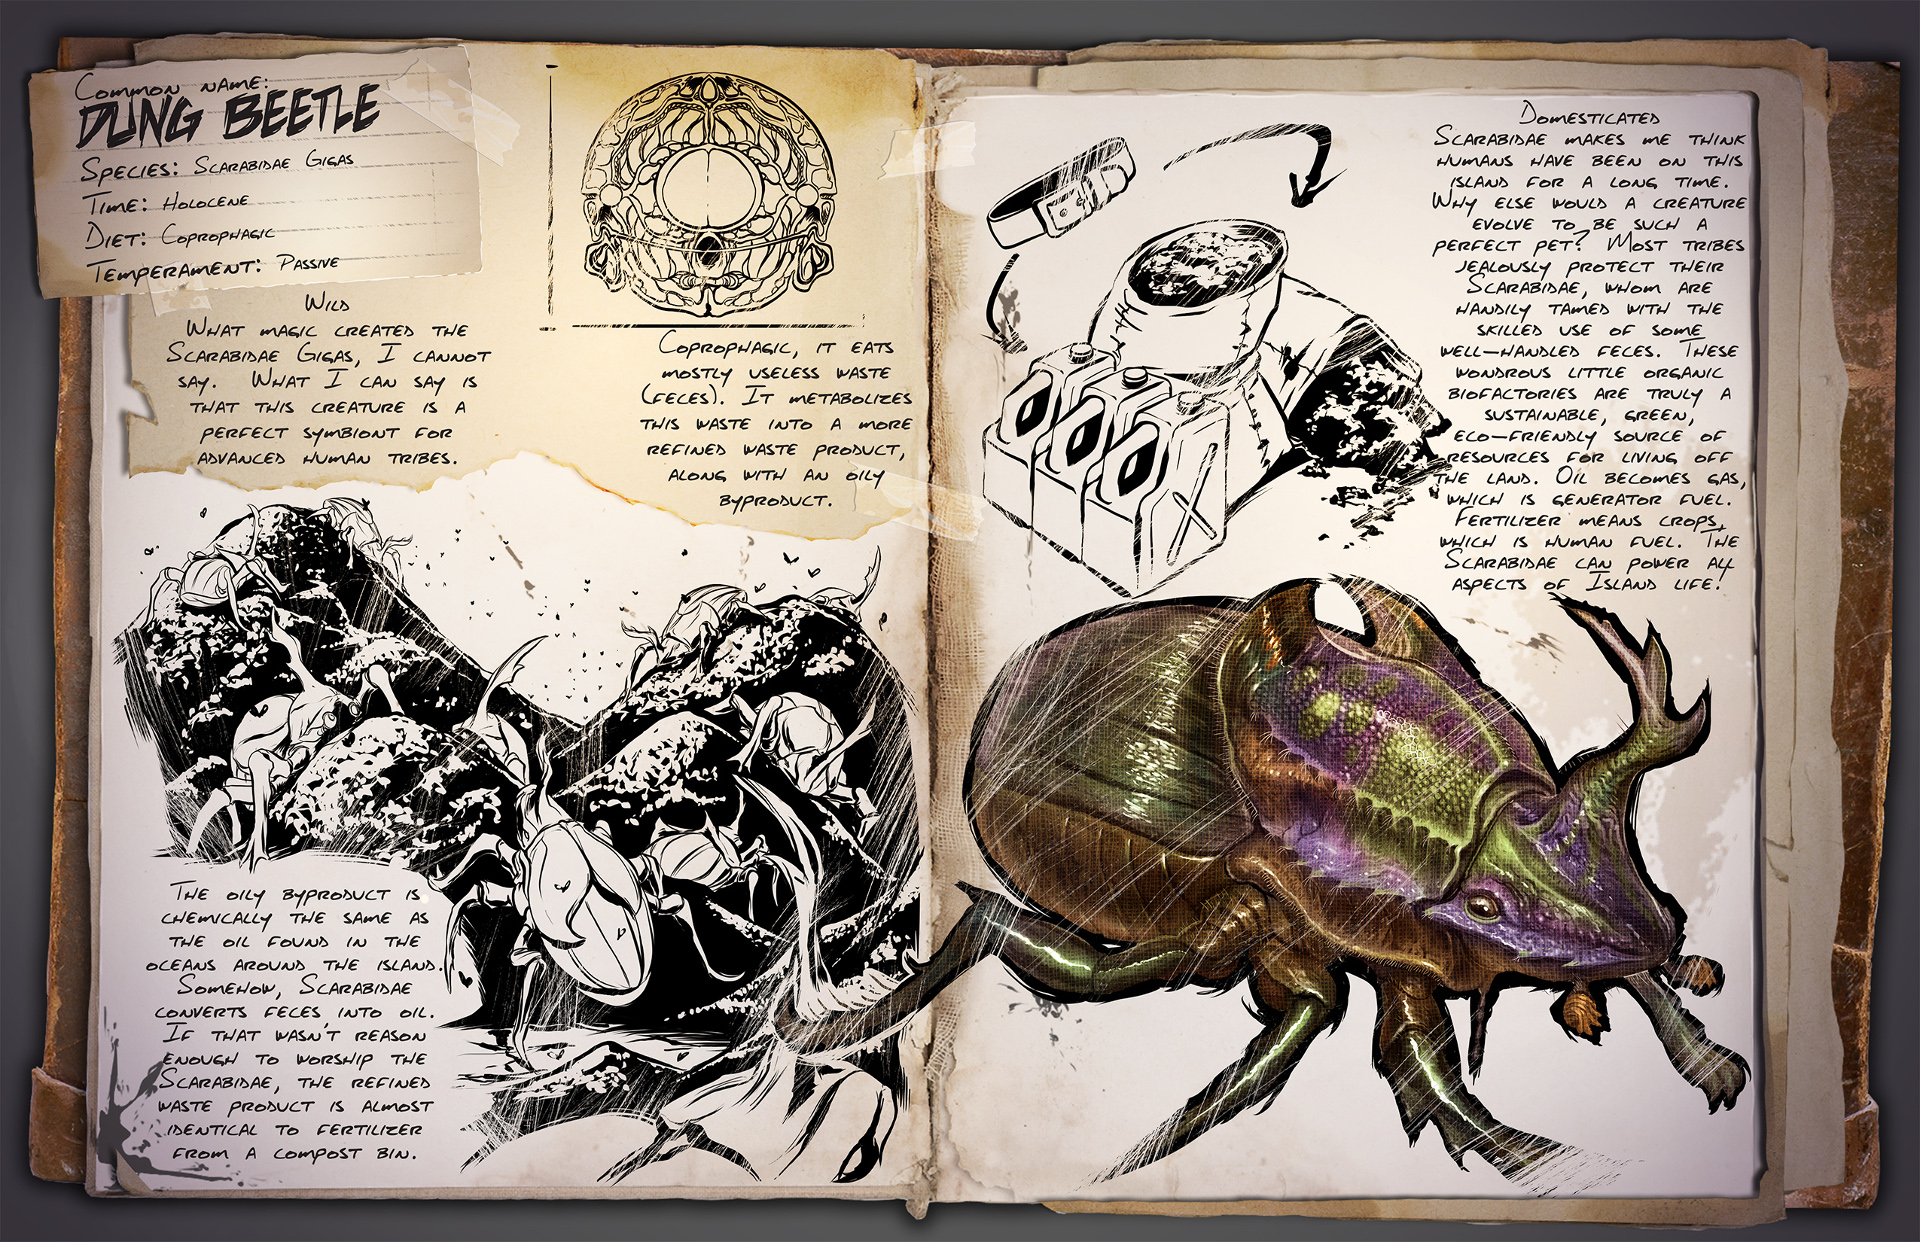 Dino Dossier: Dungbeetle